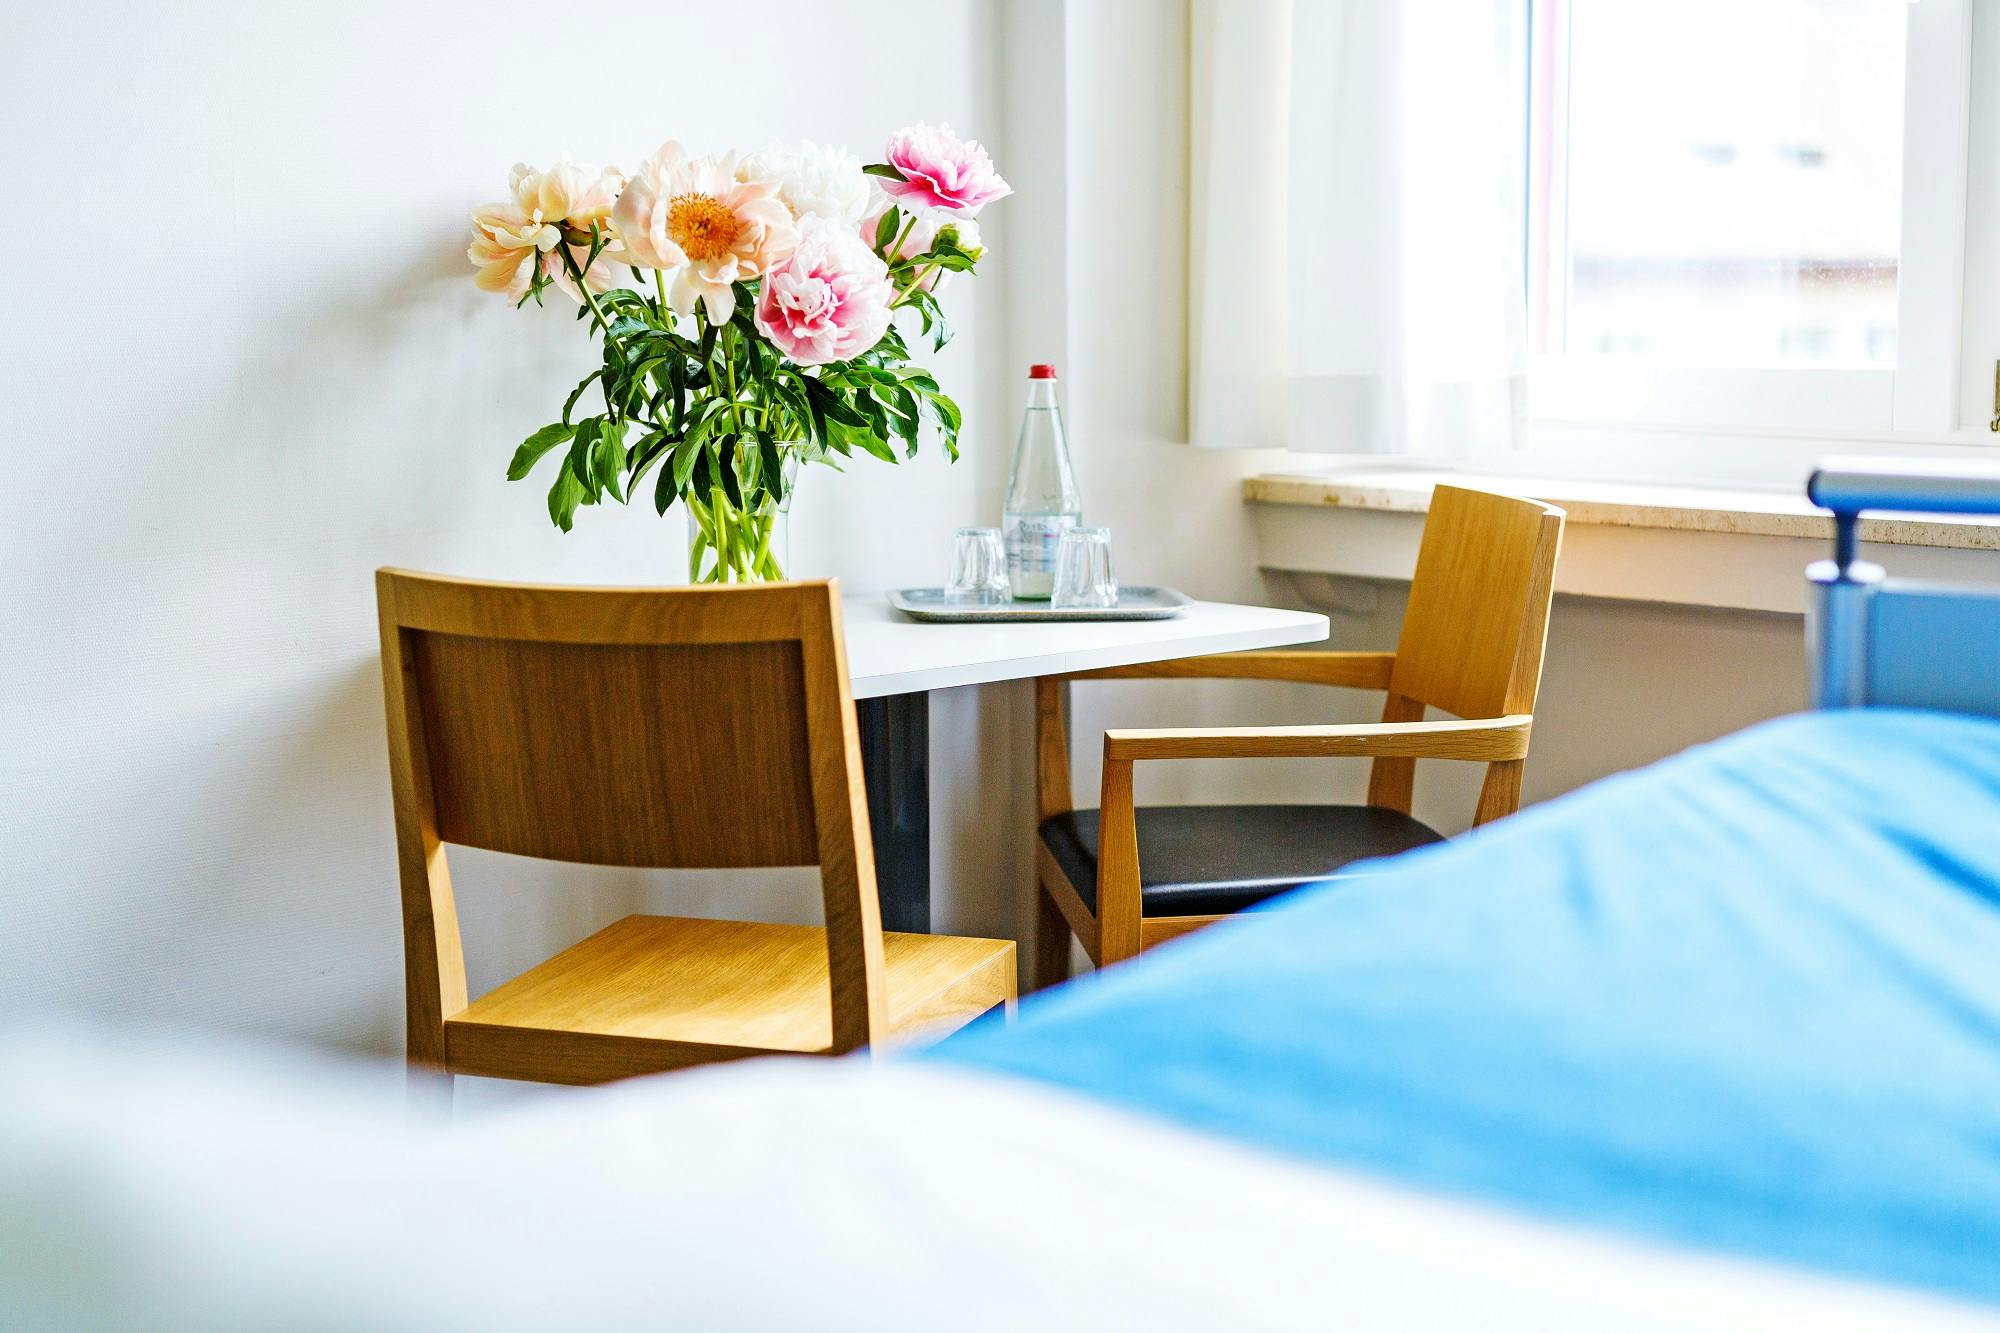 Cosy room with a bouquet of flowers on the table and wooden chairs.